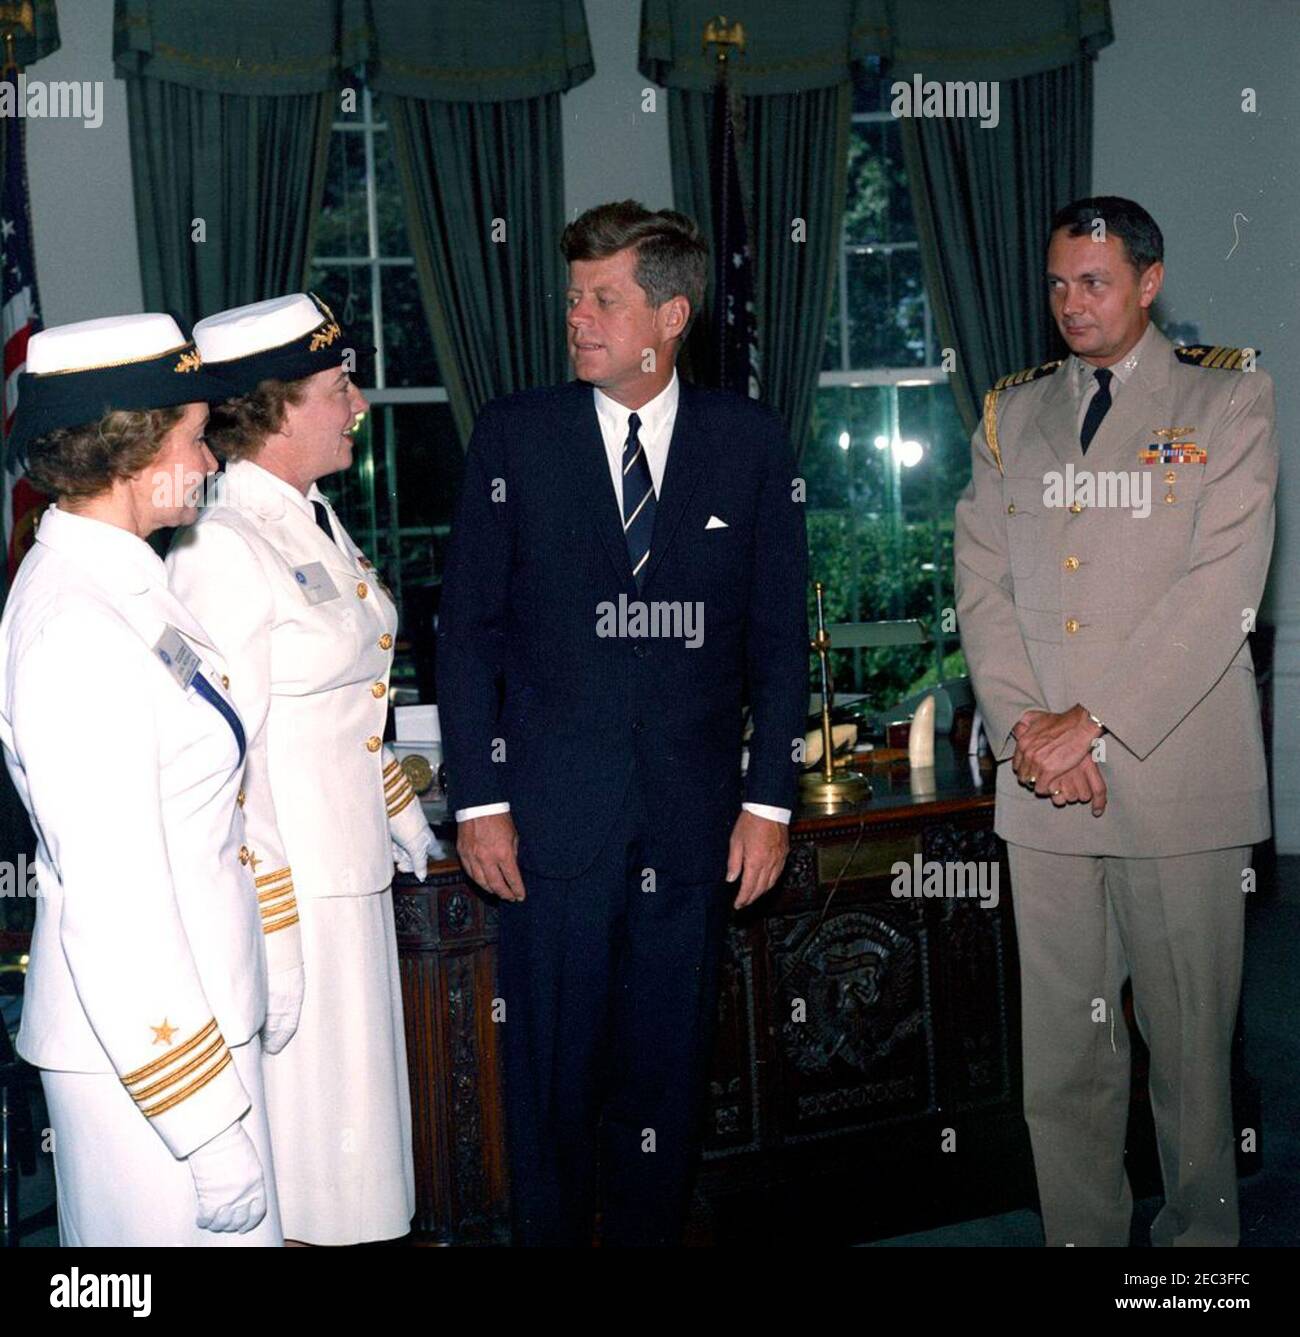 Visit of Captain Winifred Quick Collins, Director of Women Accepted for Volunteer Emergency Service (WAVES), 9:48AM. President John F. Kennedy visits with U.S. Navy officers. Left to right: Women Accepted for Volunteer Emergency Service (WAVES) officer, Commander Irene Wolensky; Director of WAVES, Captain Winifred Quick Collins; President Kennedy; and Naval Aide to the President, Captain Tazewell T. Shepard, Jr. Oval Office, White House, Washington, D.C. Stock Photo